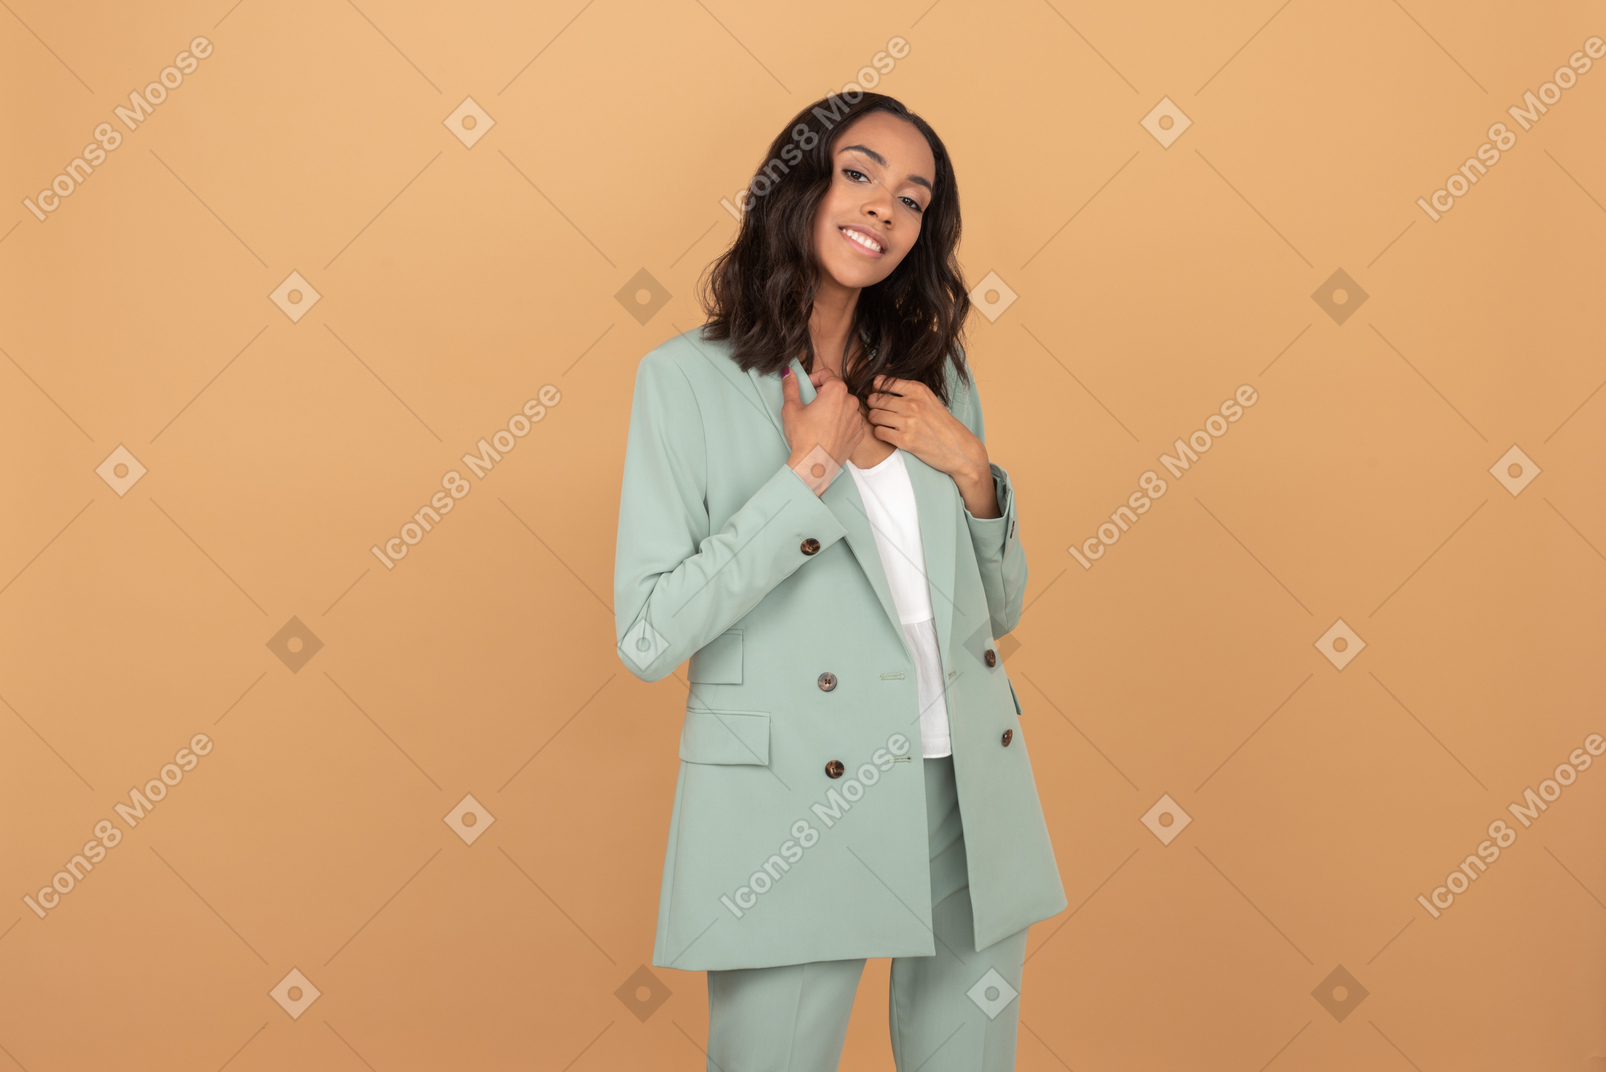 Contented young girl standing holding her jacket's collar